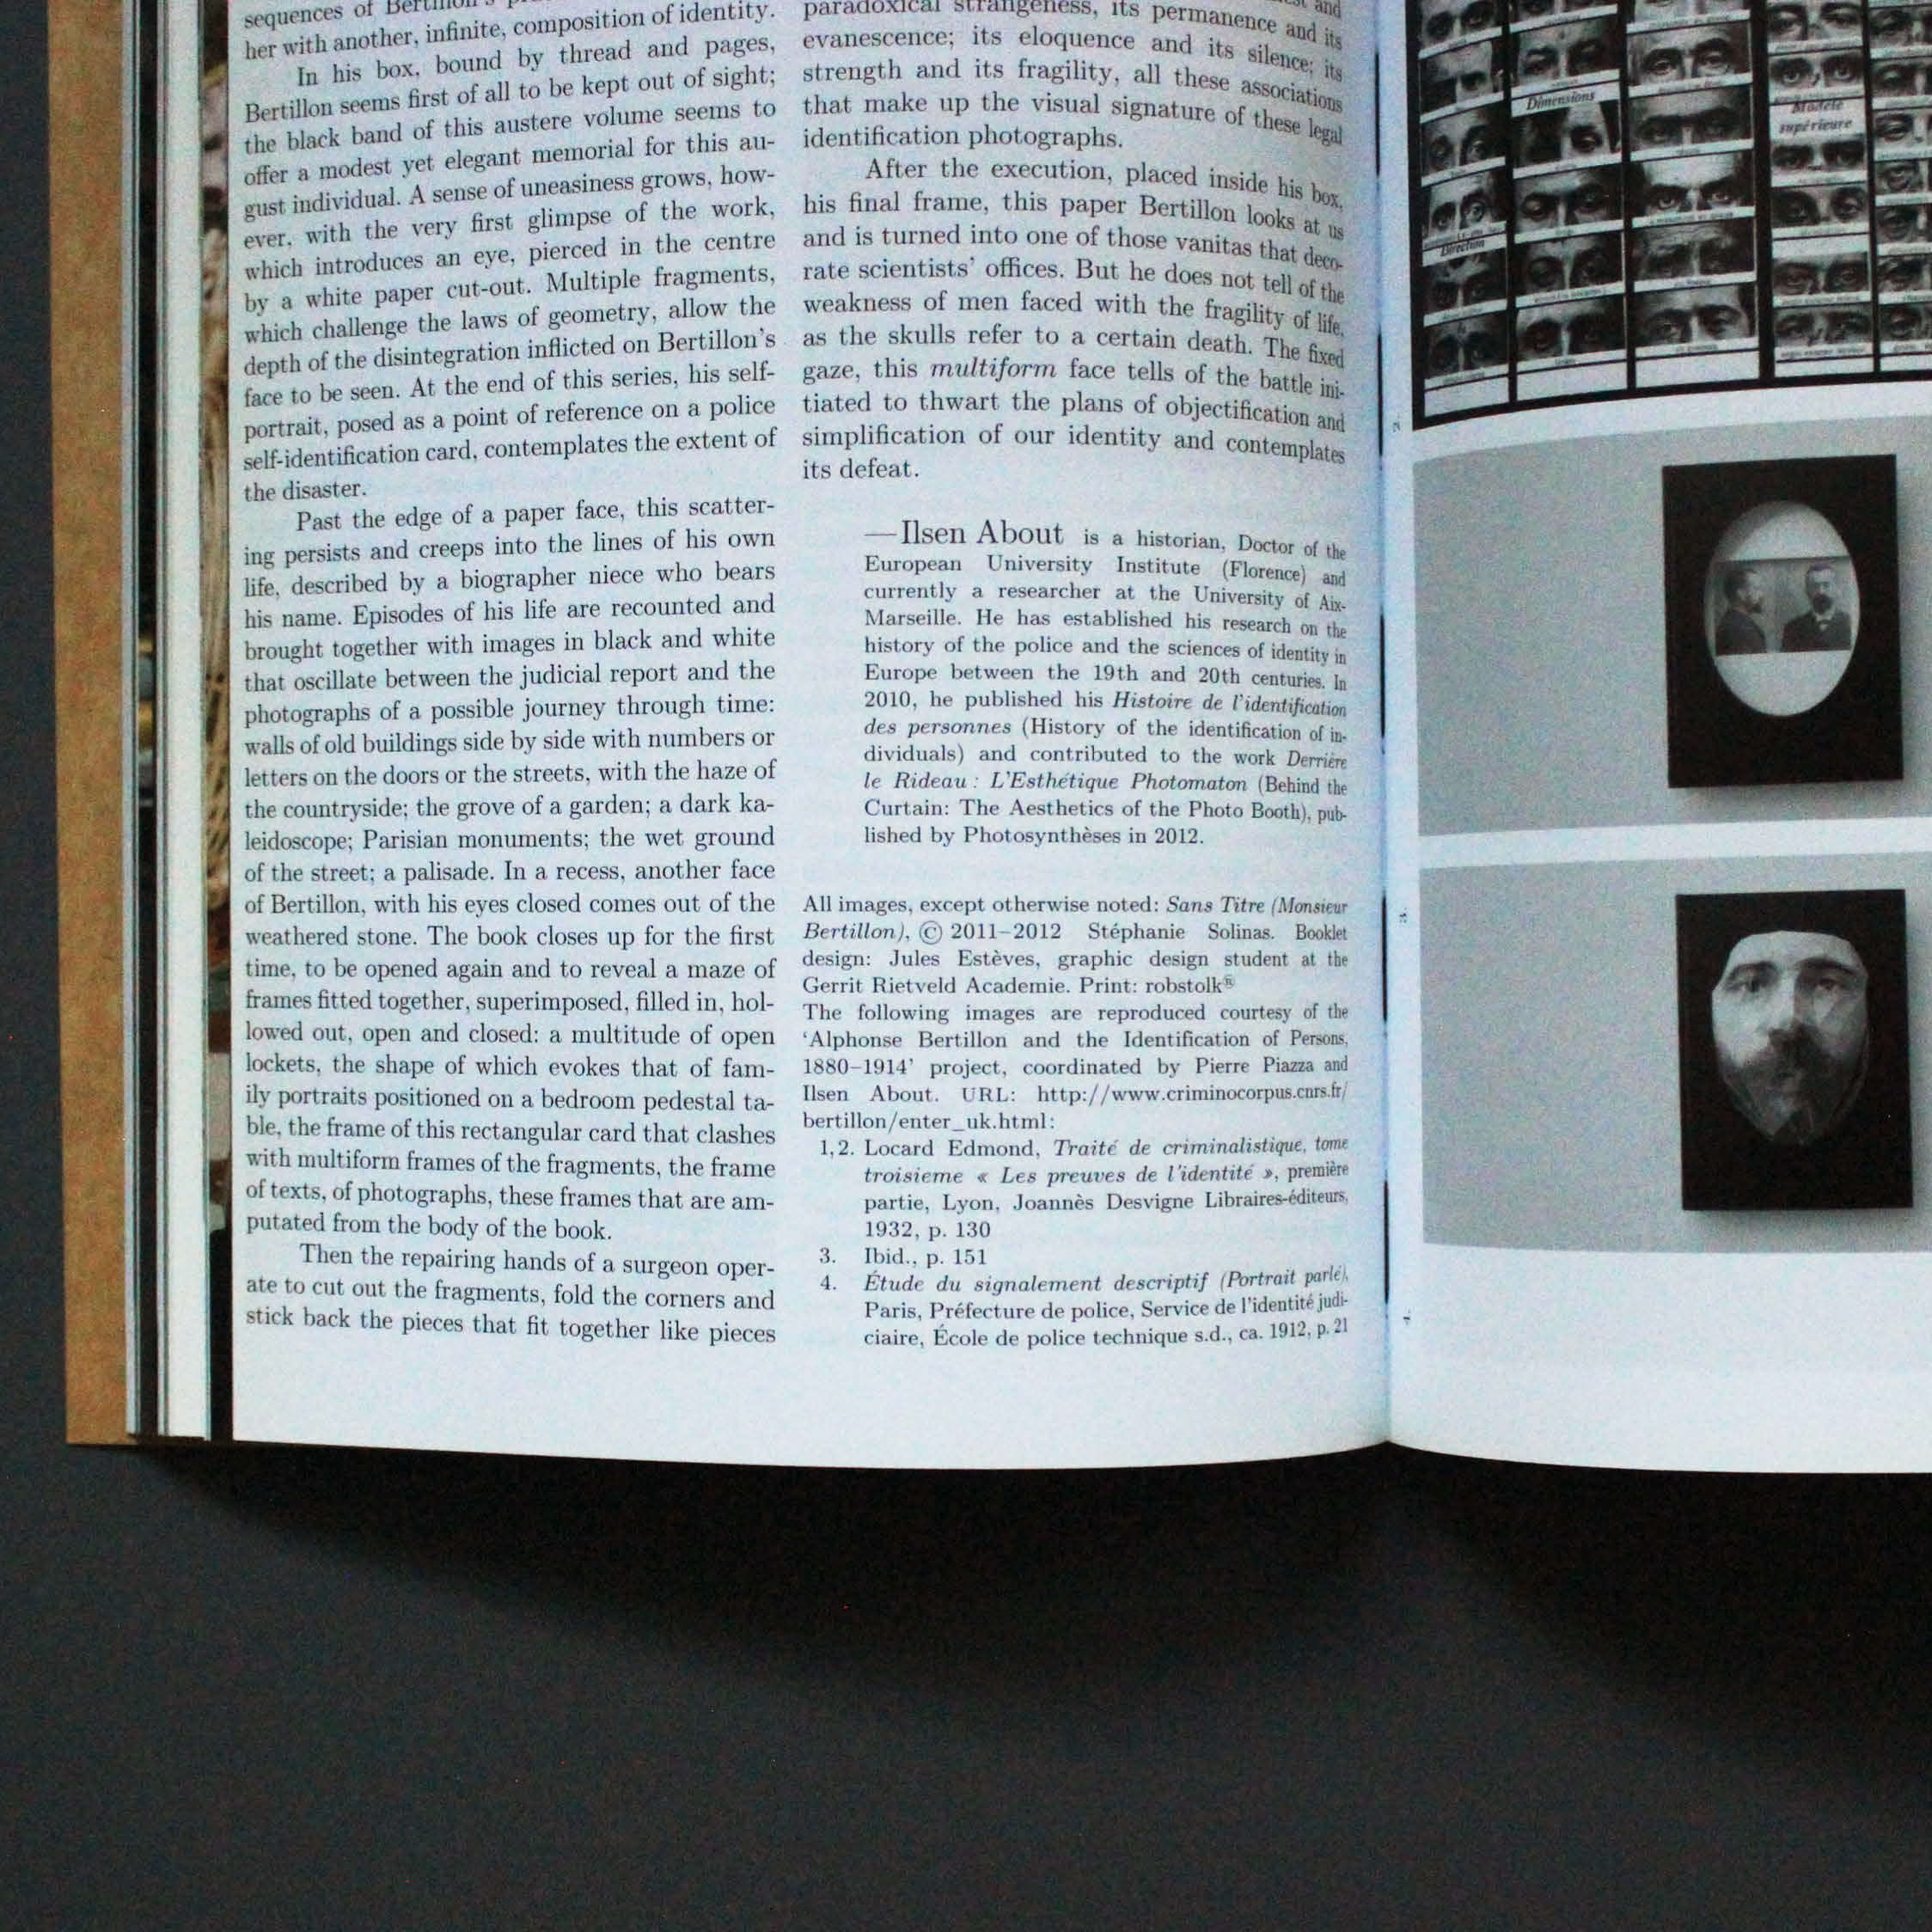 Foam Photography Museum Amsterdam, brochures for Stéphanie Solinas, Rico Scagliola & Michael Meier exhibitions